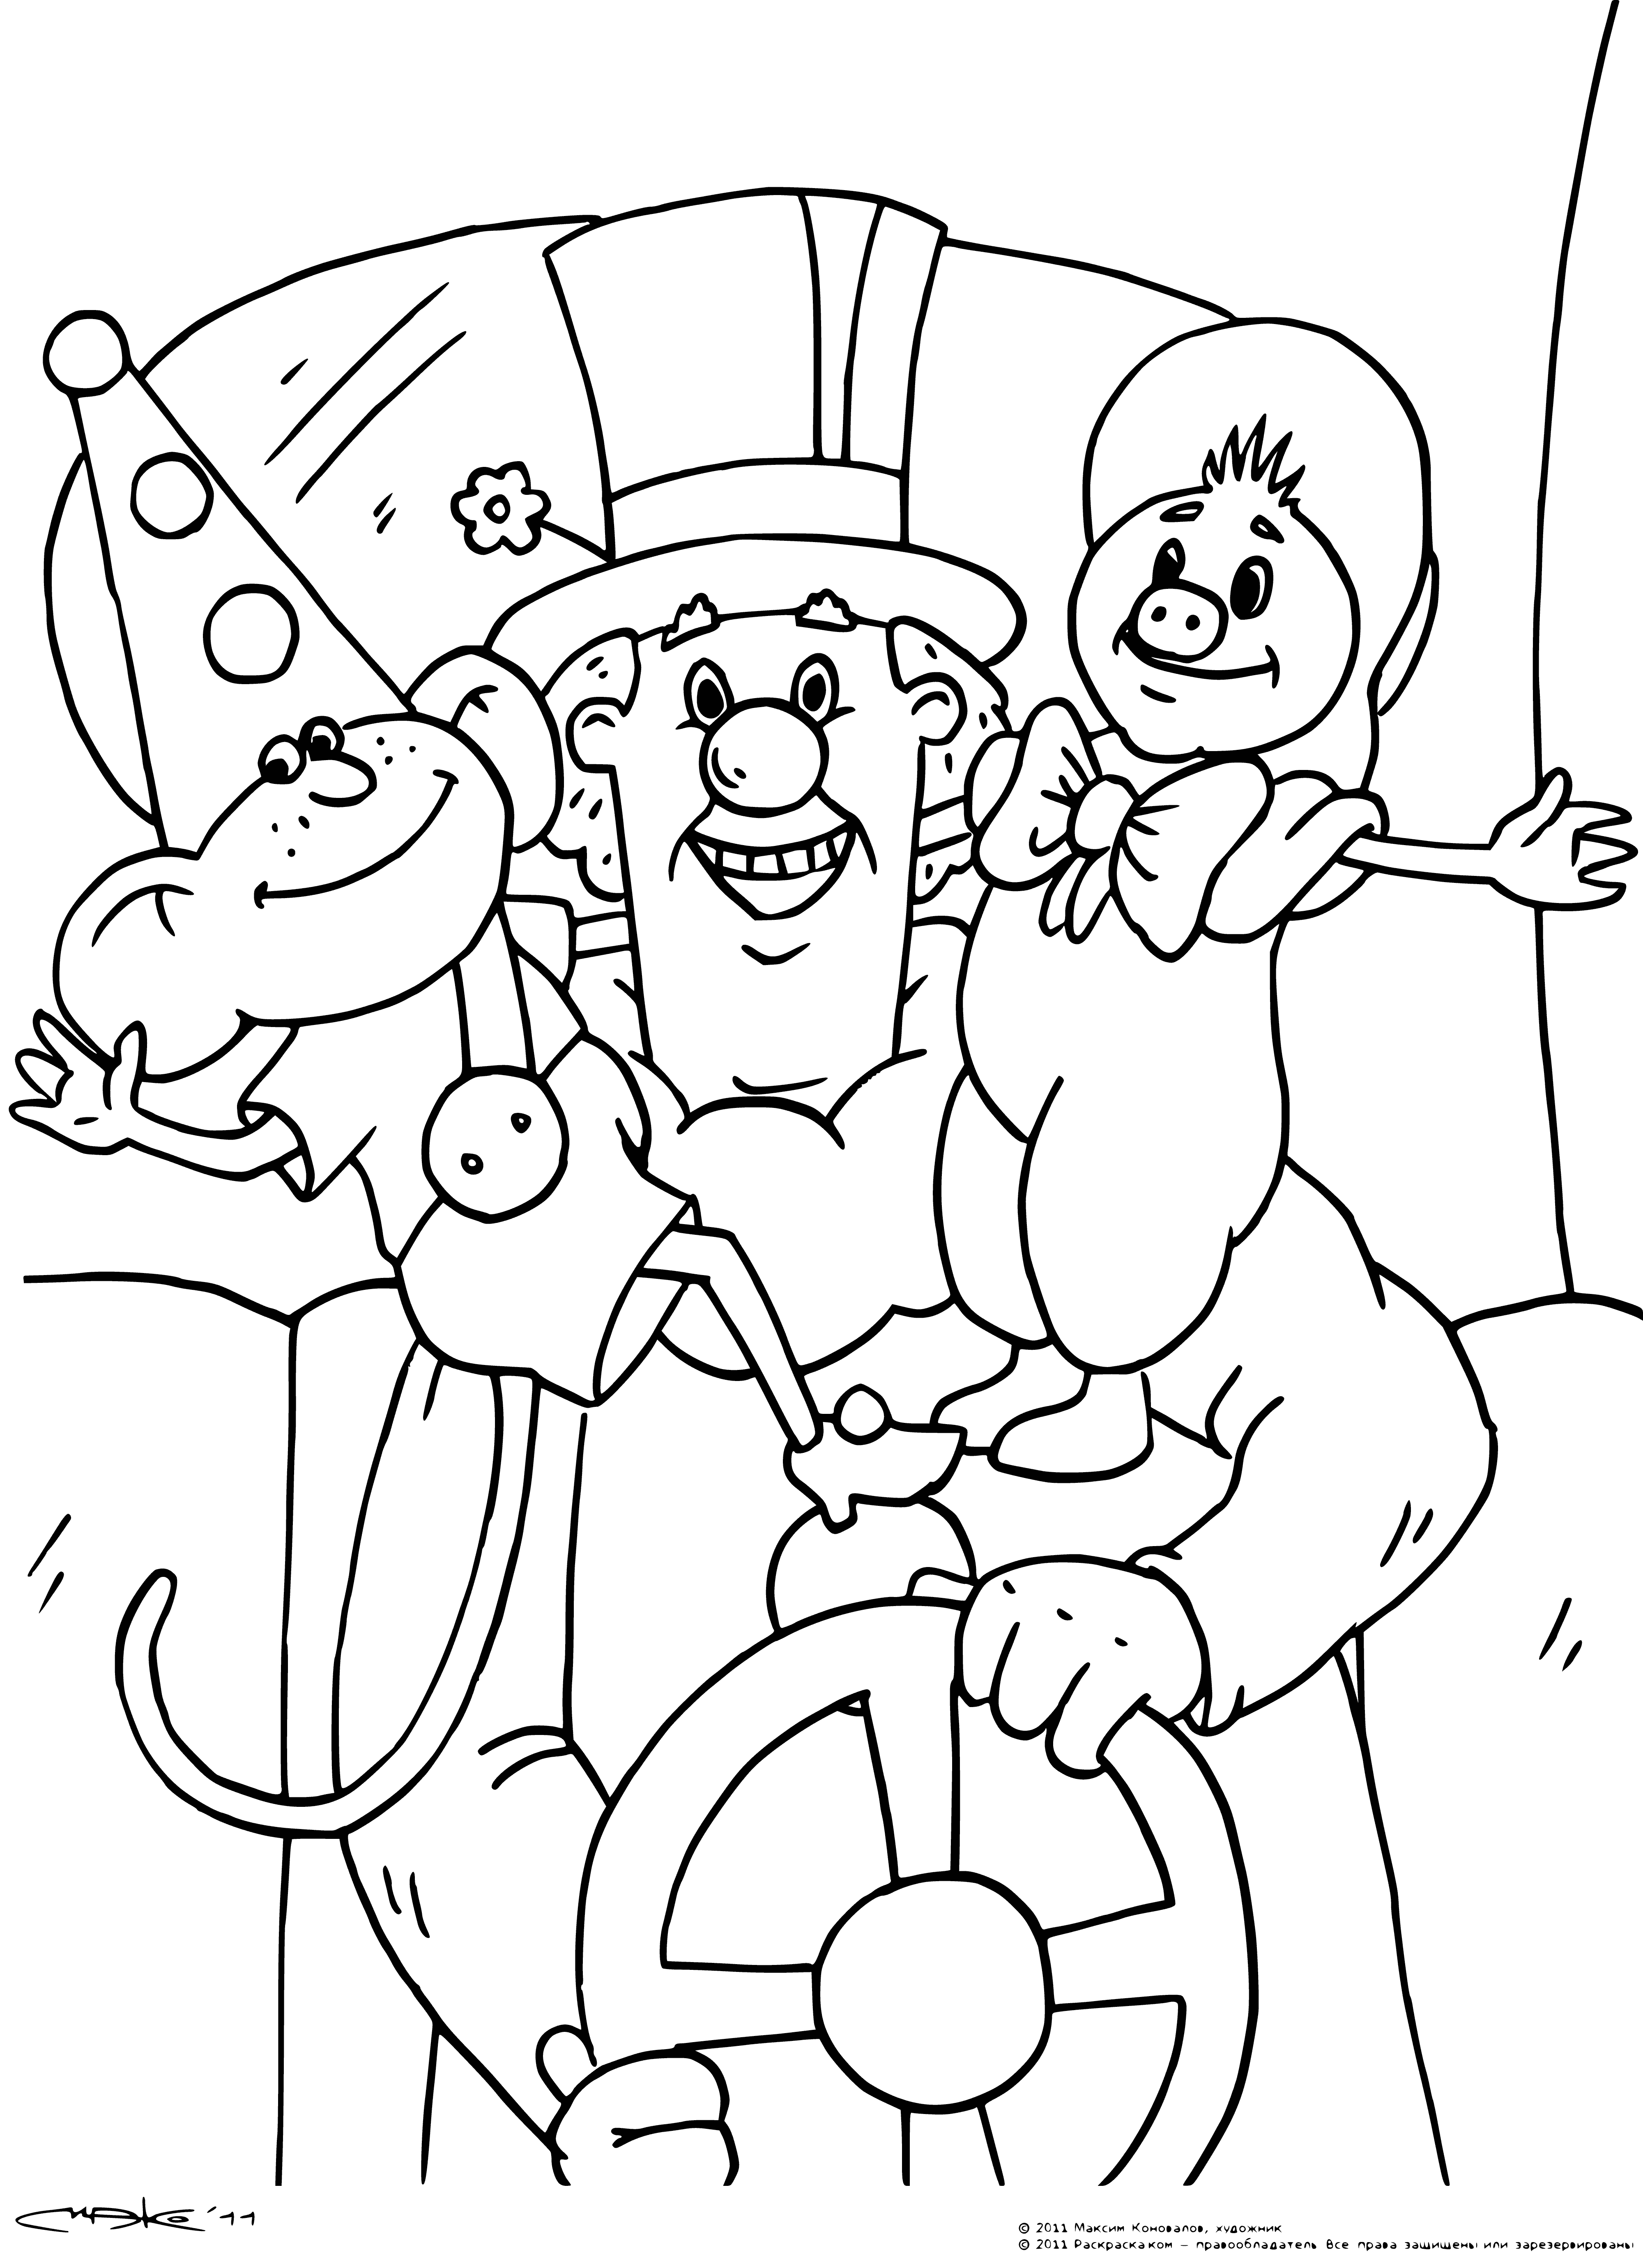 coloring page: Girl on hill looking up at rainbow with arms outstretched and smile on her face.